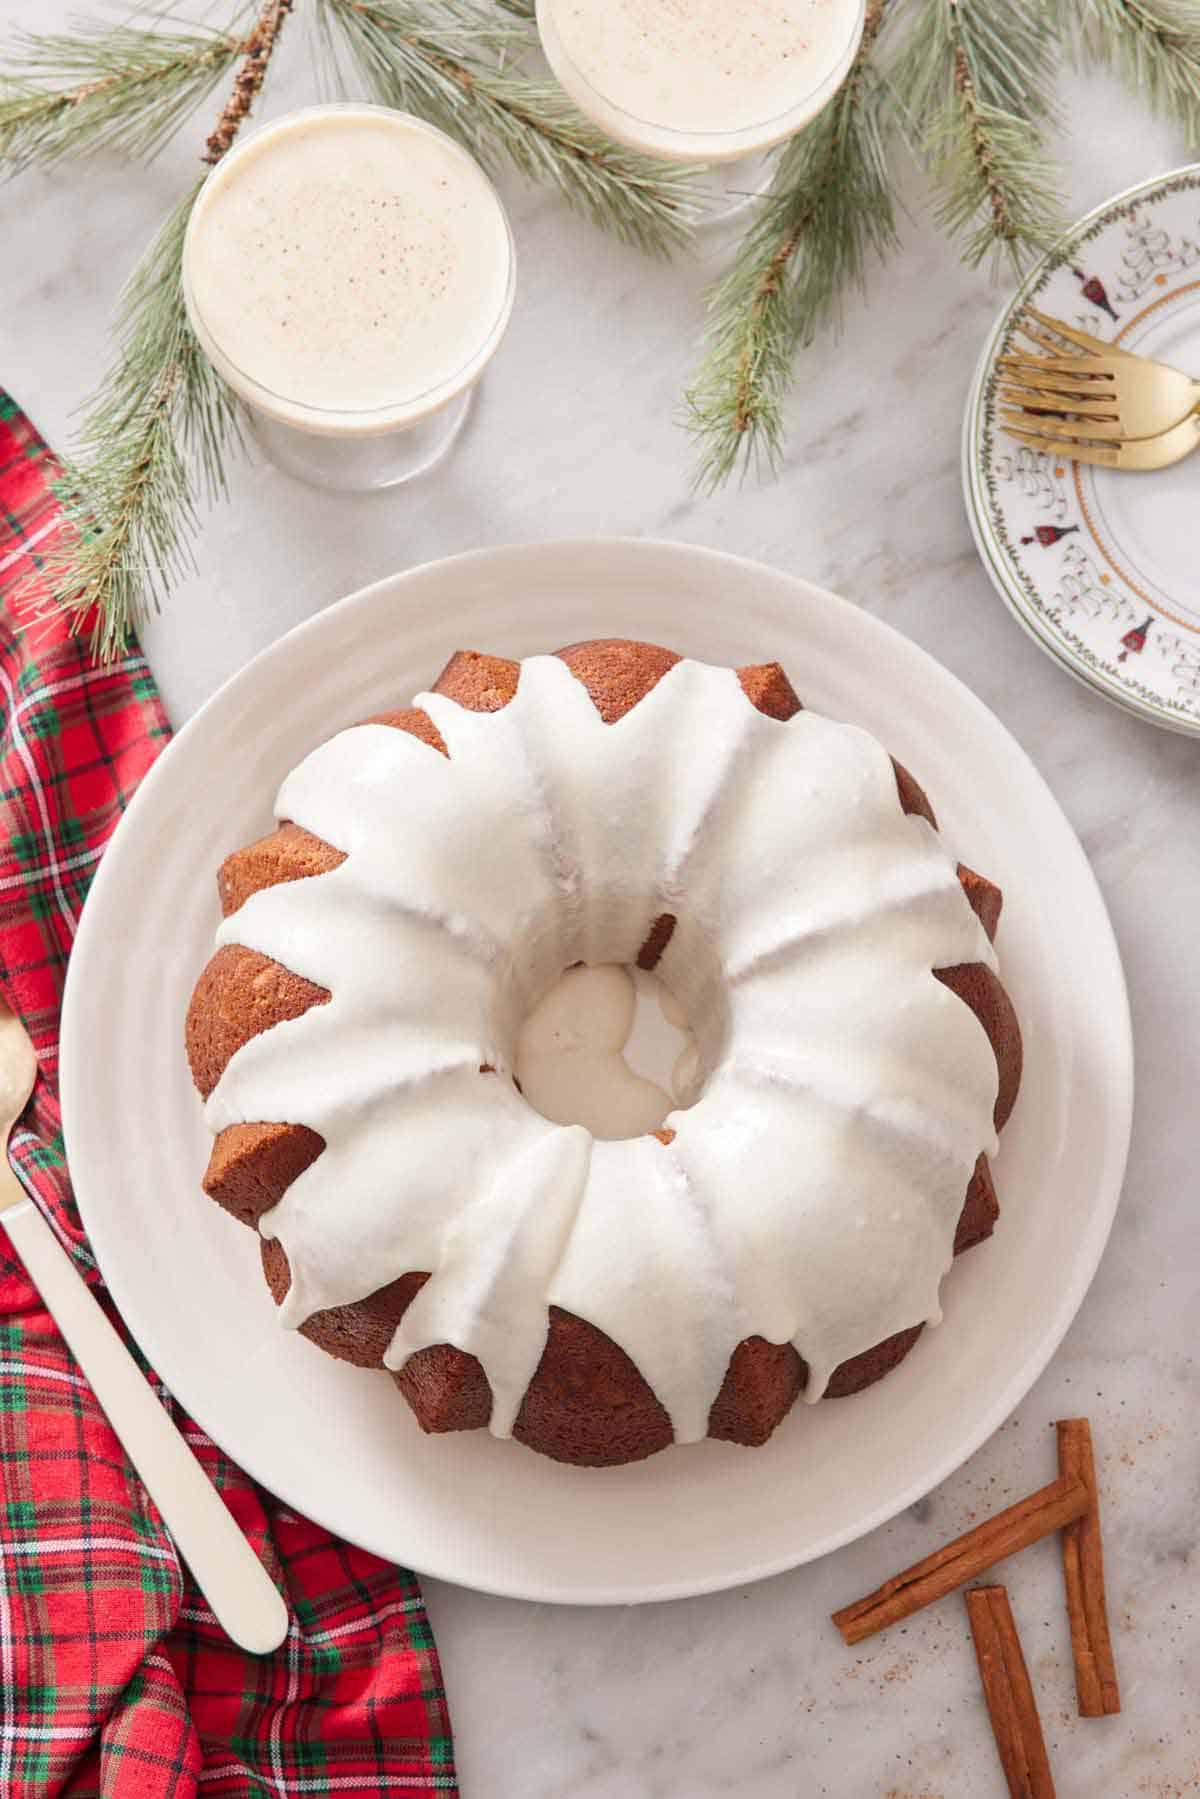 An overhead view of an eggnog cake topped with icing.